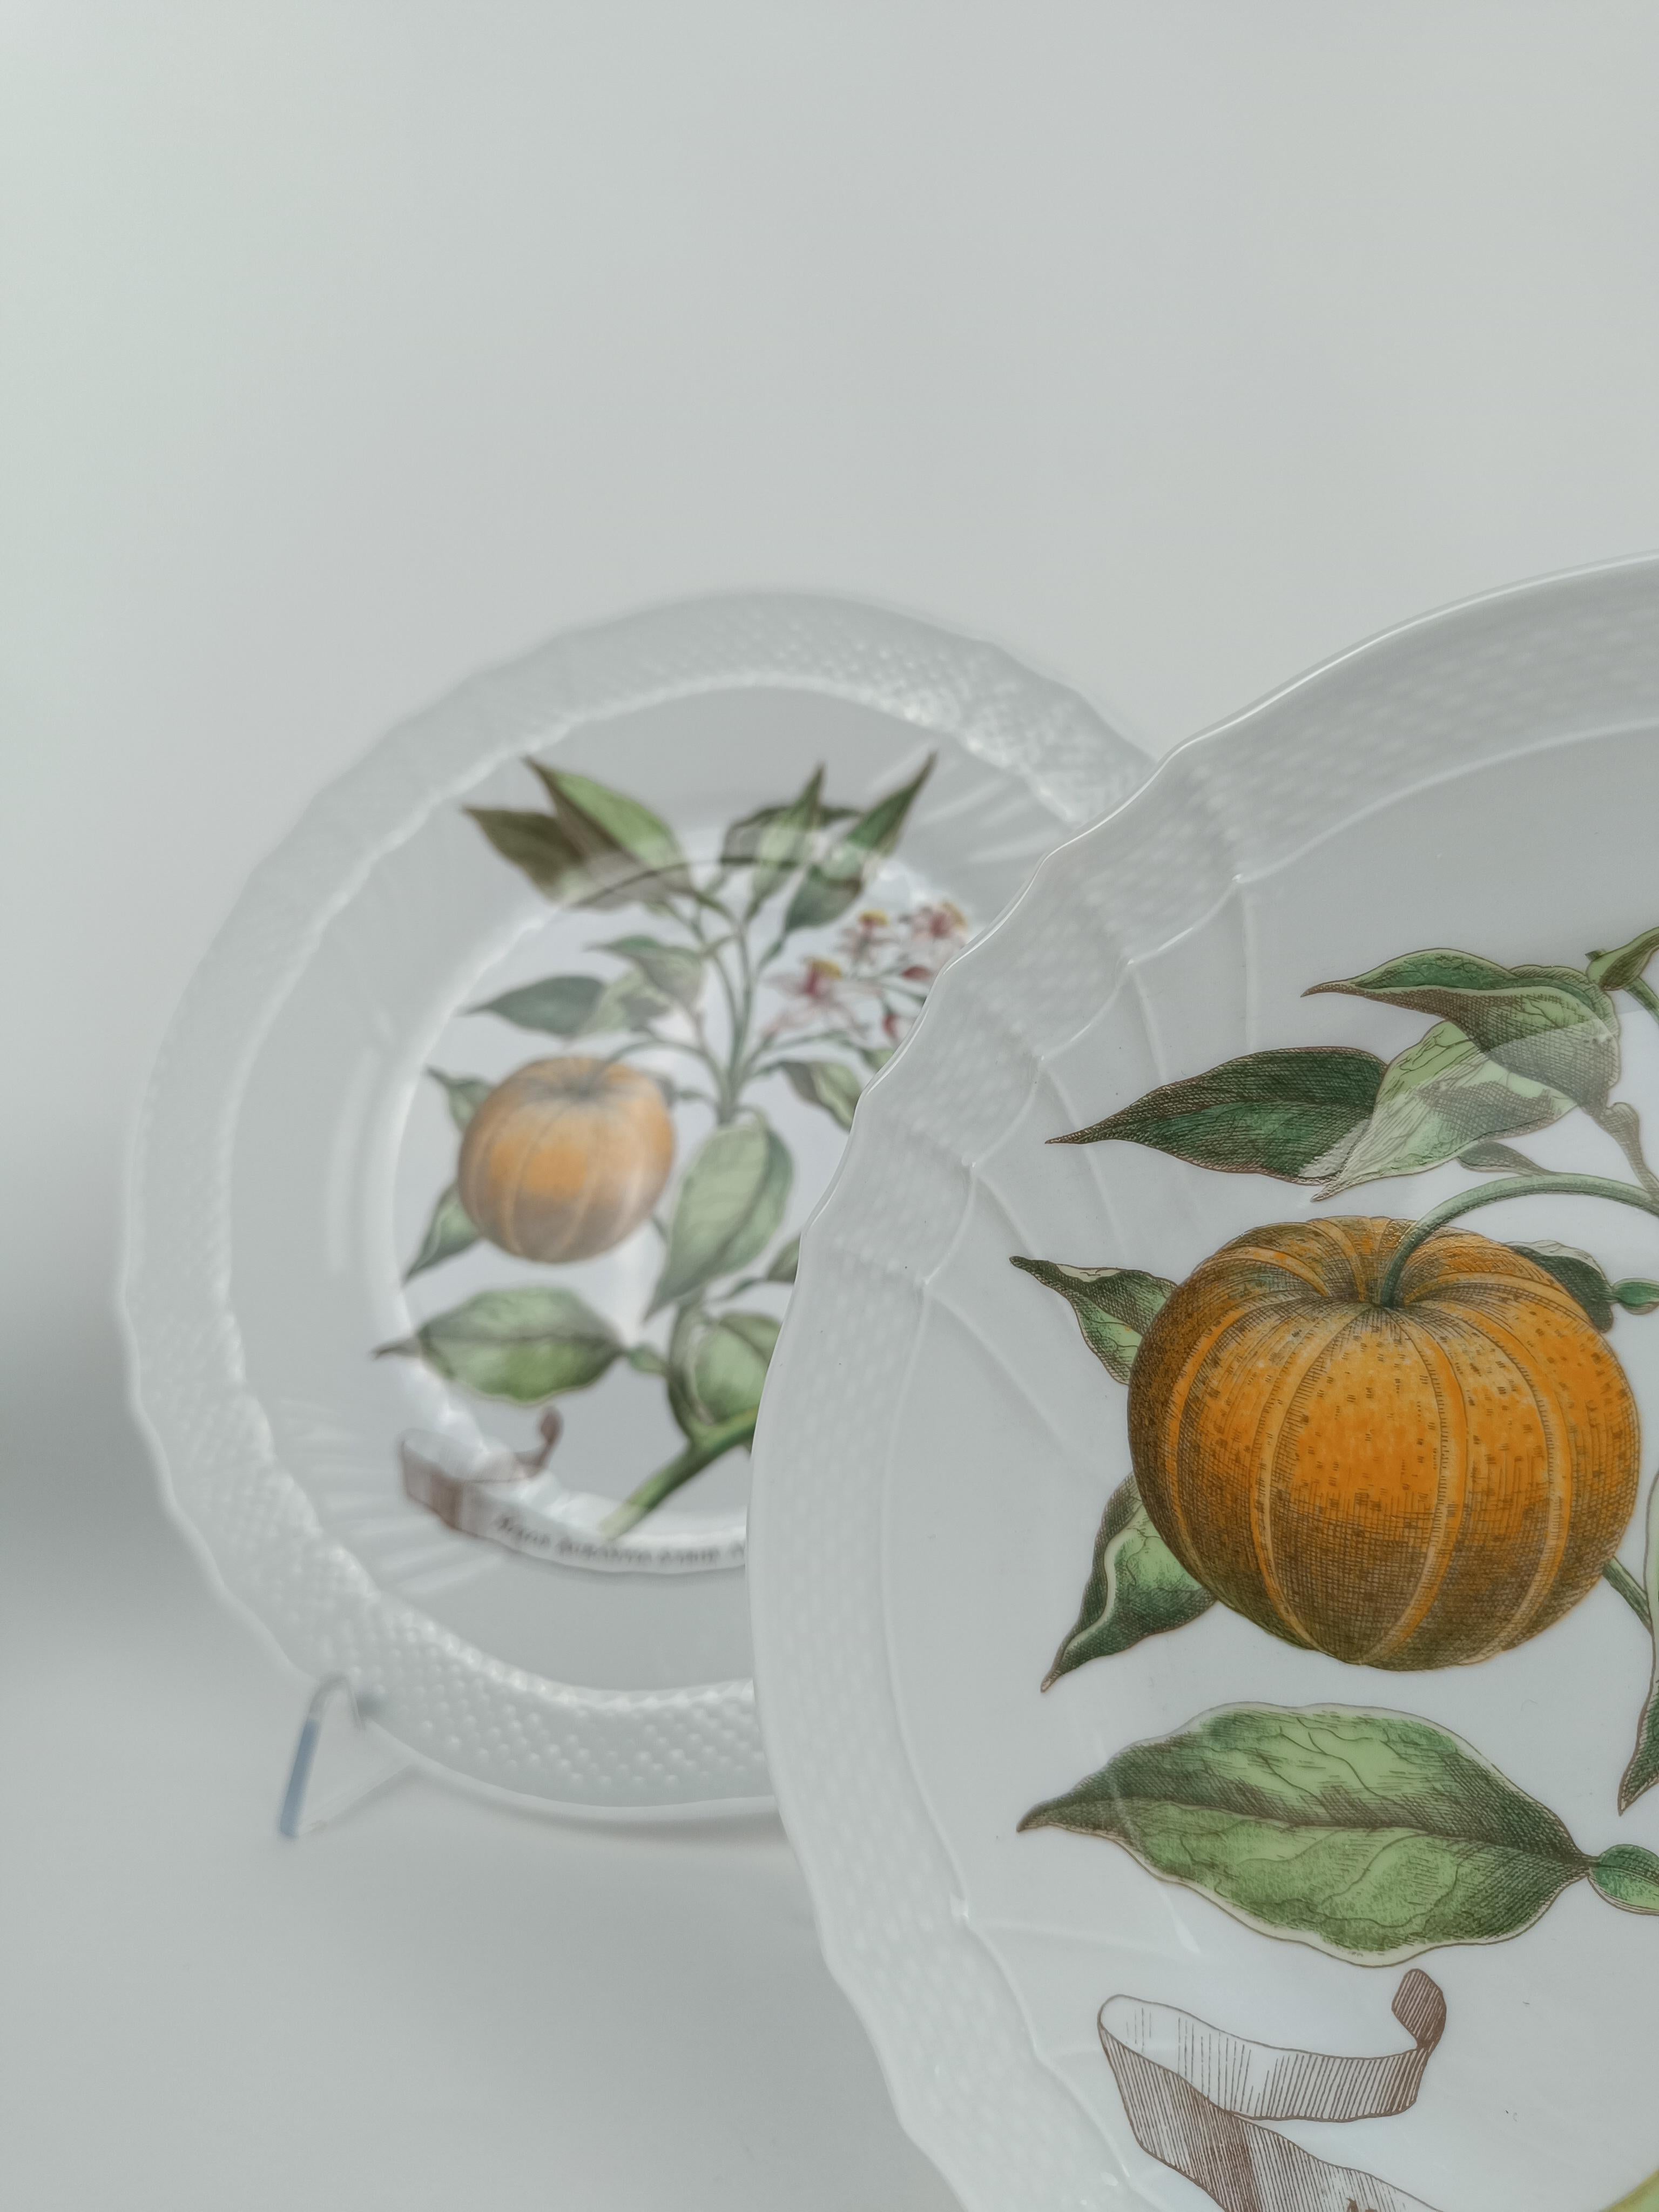 Richard Ginori China Dinner Service with a botanical print by Munting Abraham For Sale 9